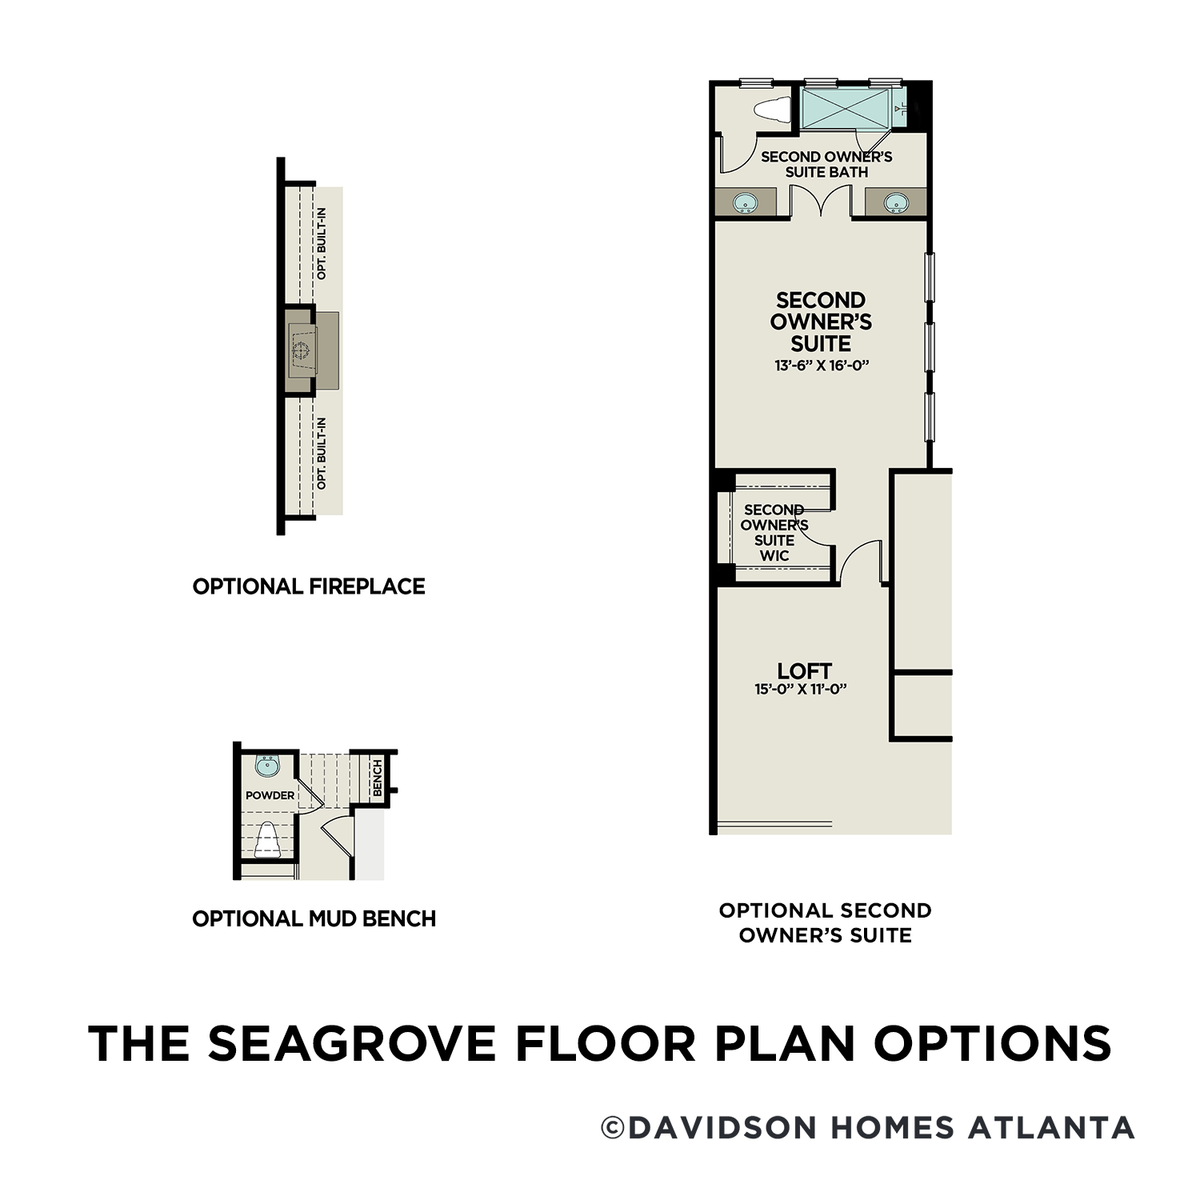 3 - The Seagrove C floor plan layout for 688 Stickley Oak Way in Davidson Homes' The Village at Towne Lake community.